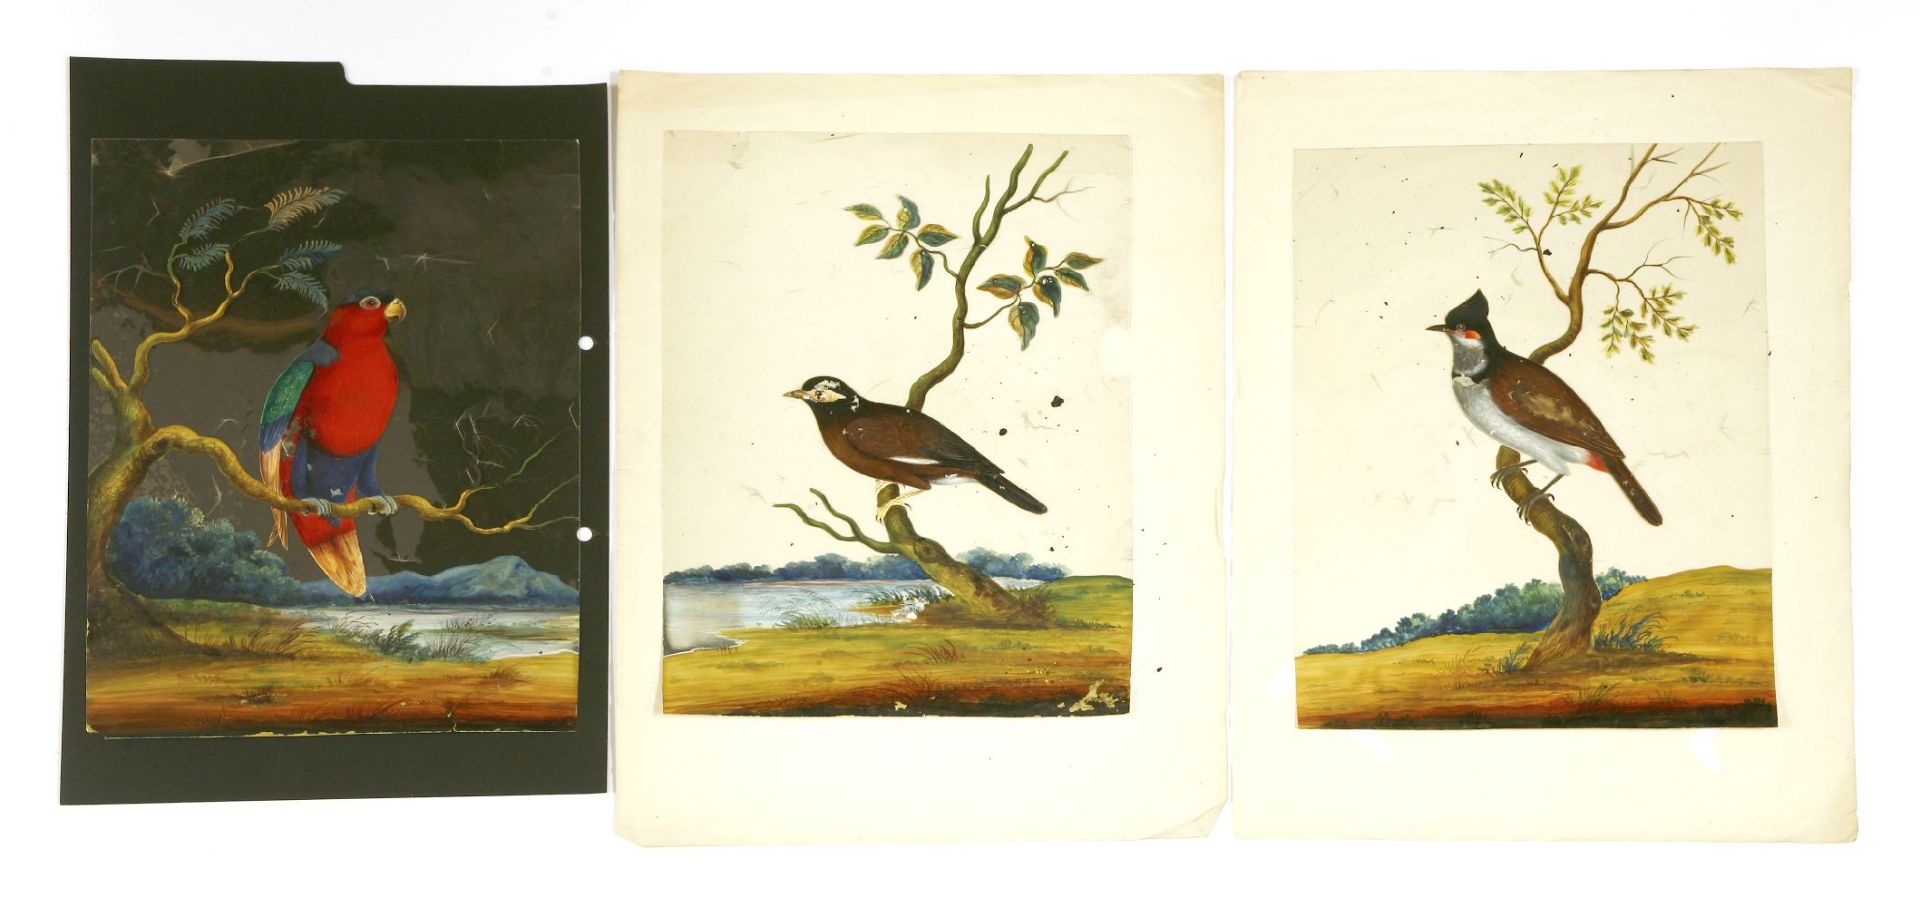 Seven Indian paintings on mica,c.1840, butterflies,14 x 9.5cm,an oval picture of a flower,12 x 10cm,